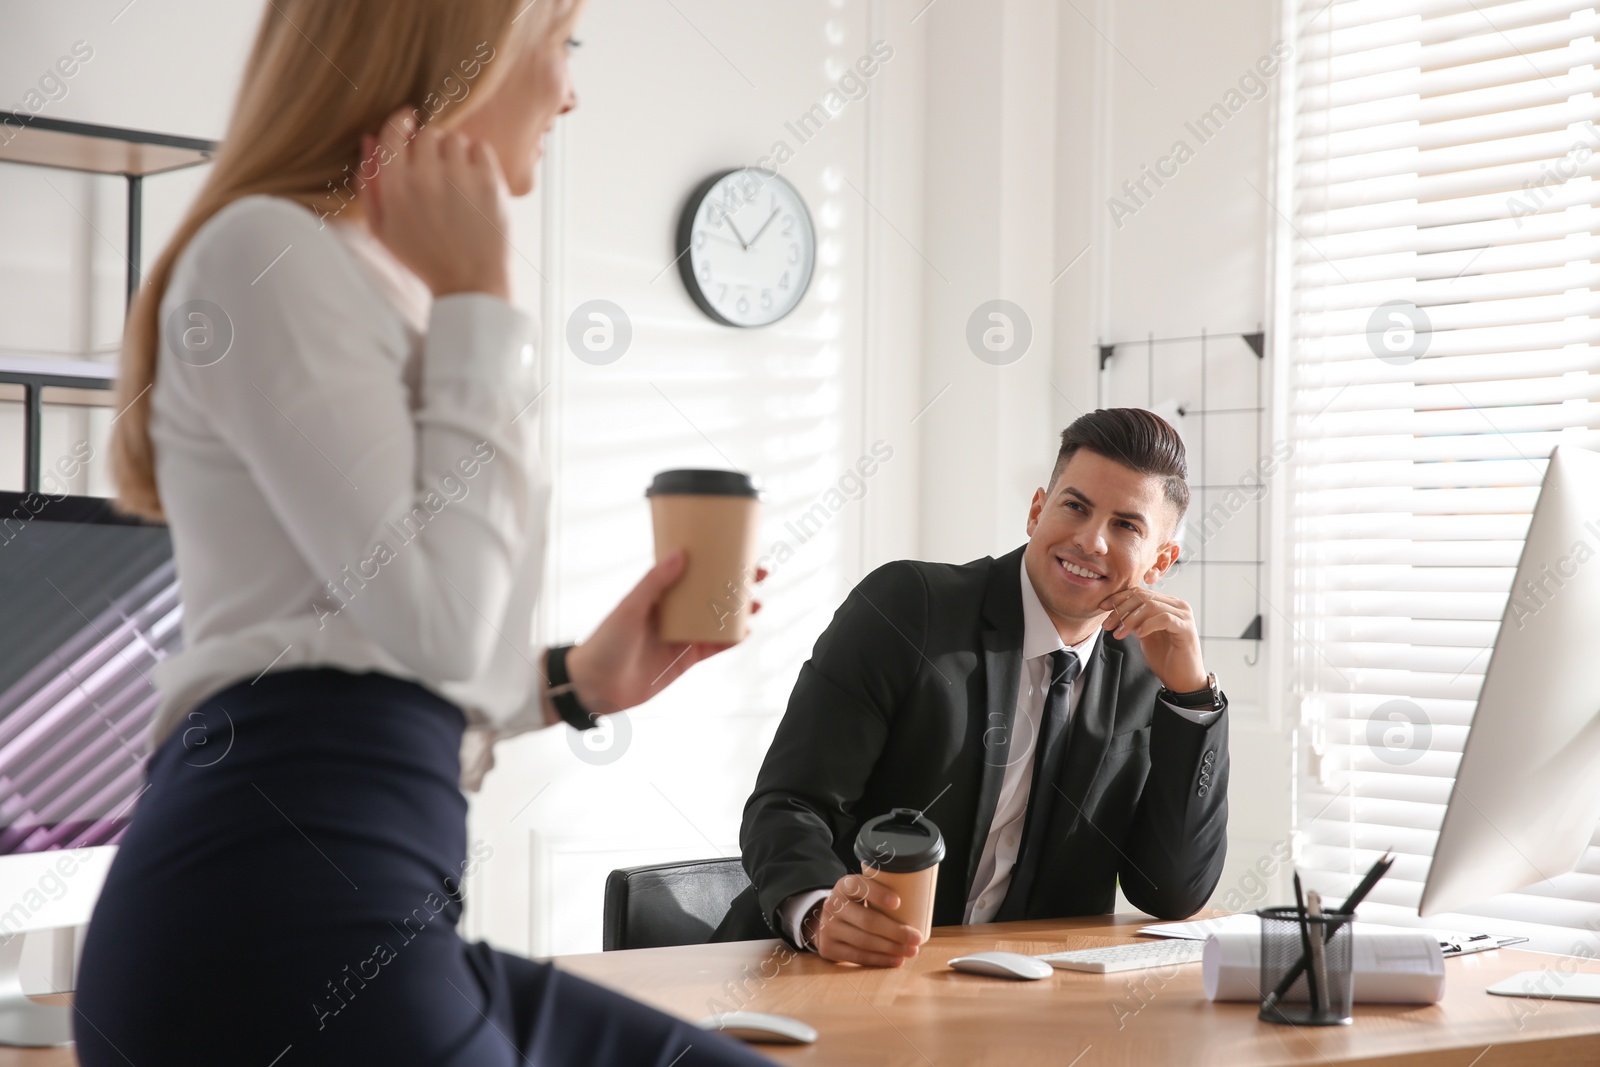 Photo of Man flirting with his colleague during coffee break in office